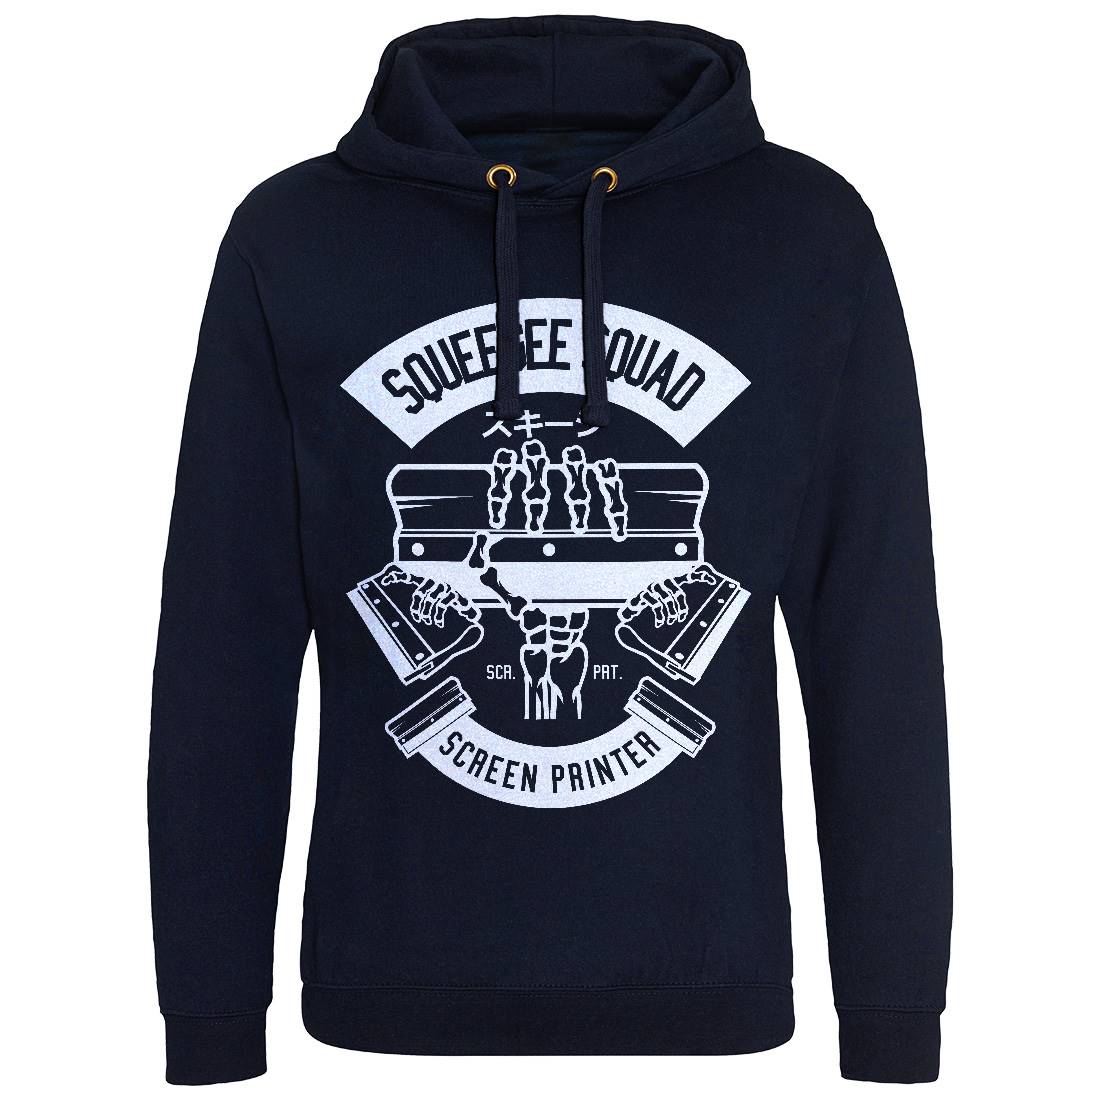 Squeegee Squad Mens Hoodie Without Pocket Retro B642